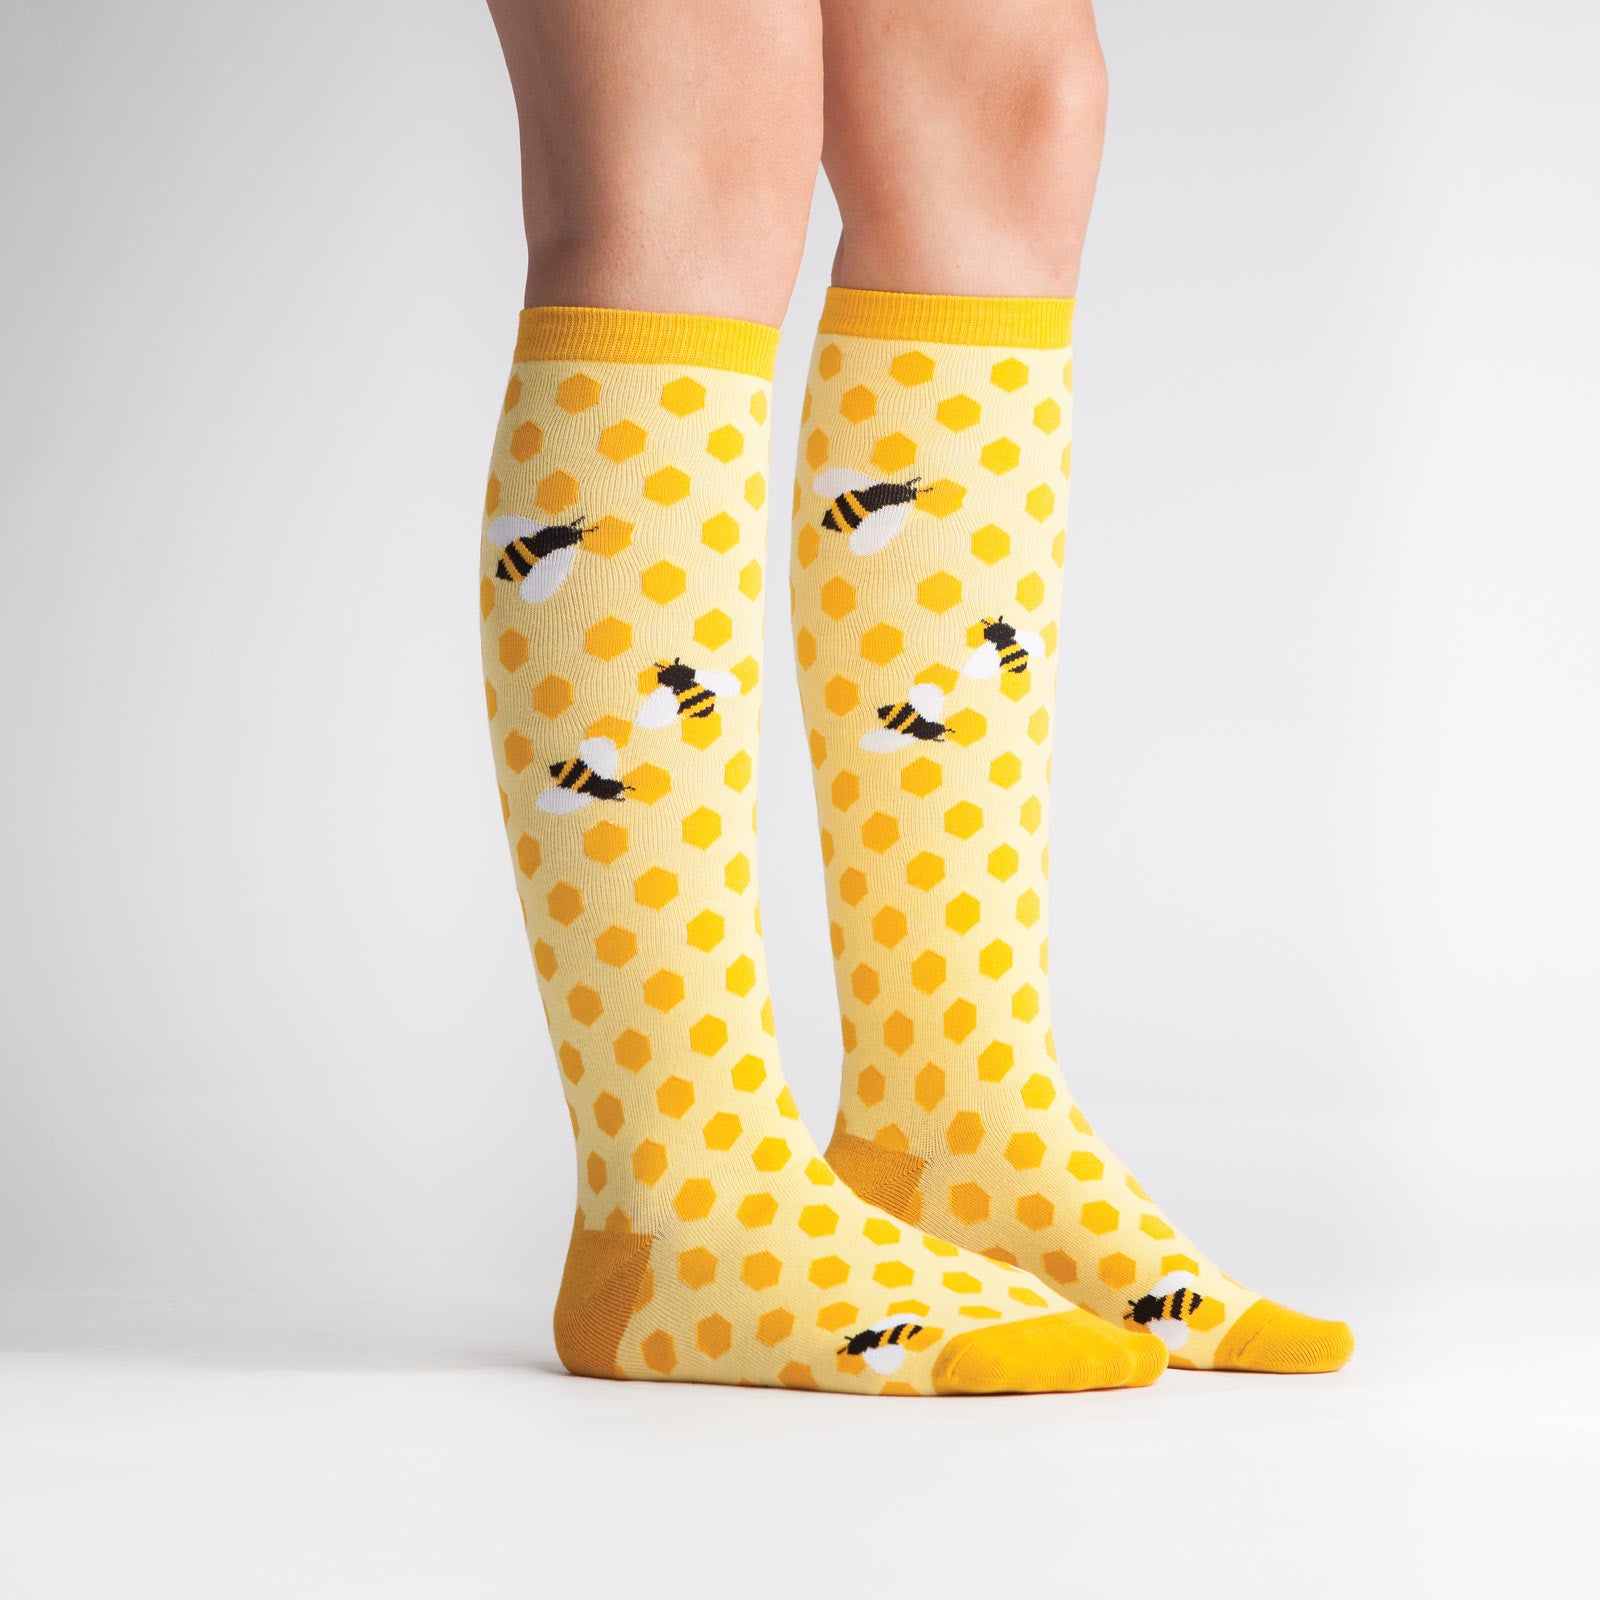 Sock It To Me women's yellow knee high sock Bees Knees featuring honeycomb and bees all over on model from side